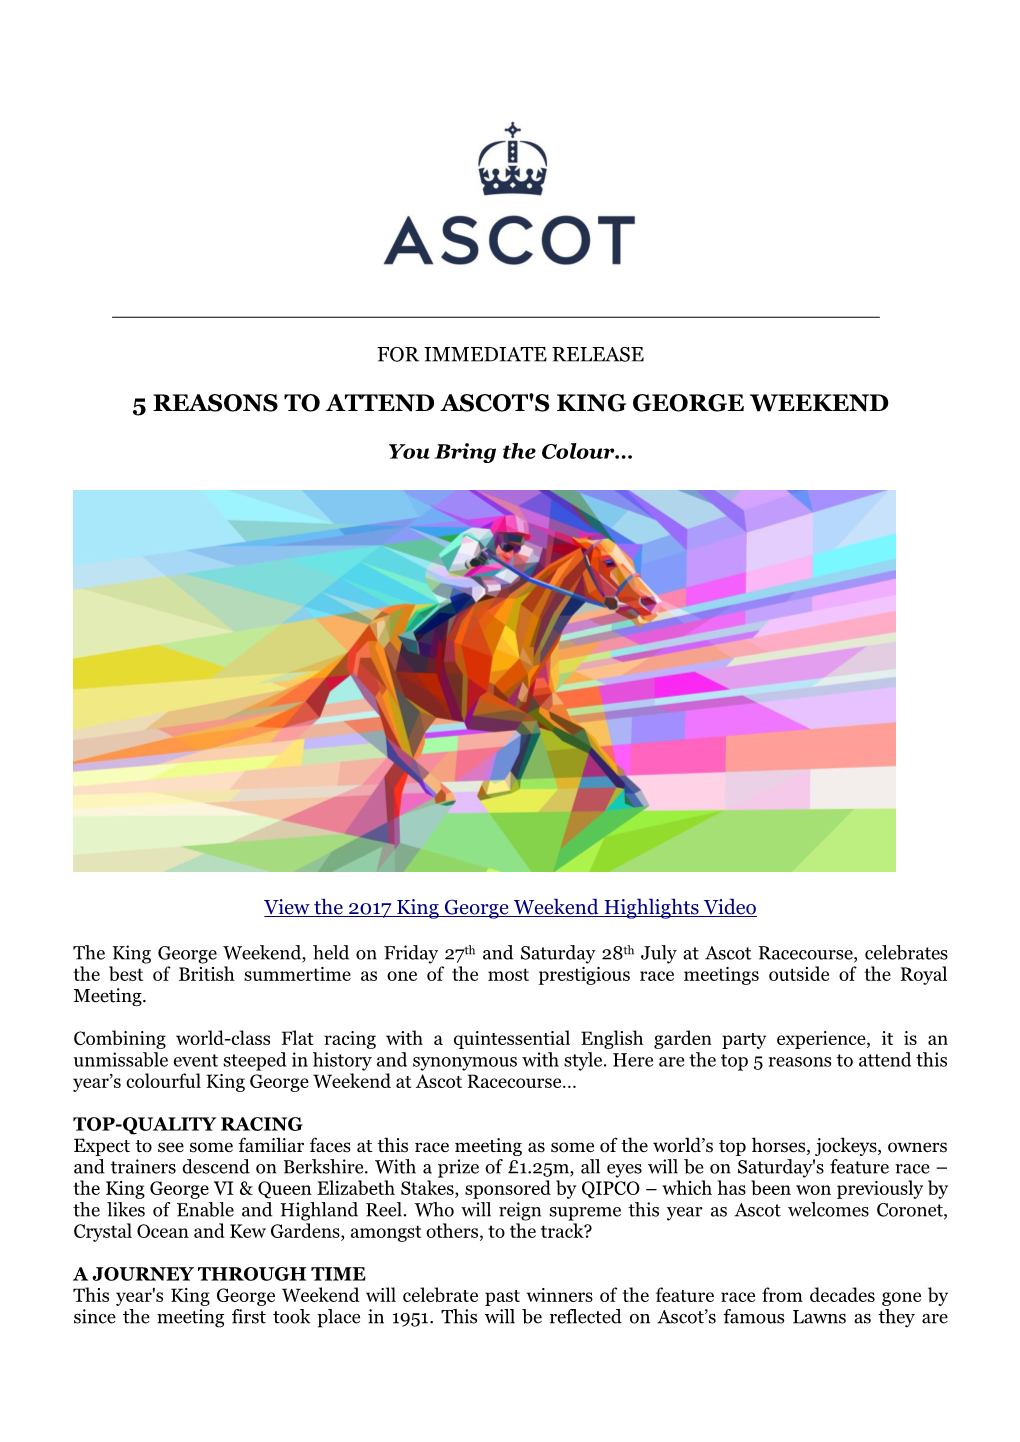 5 Reasons to Attend Ascot's King George Weekend